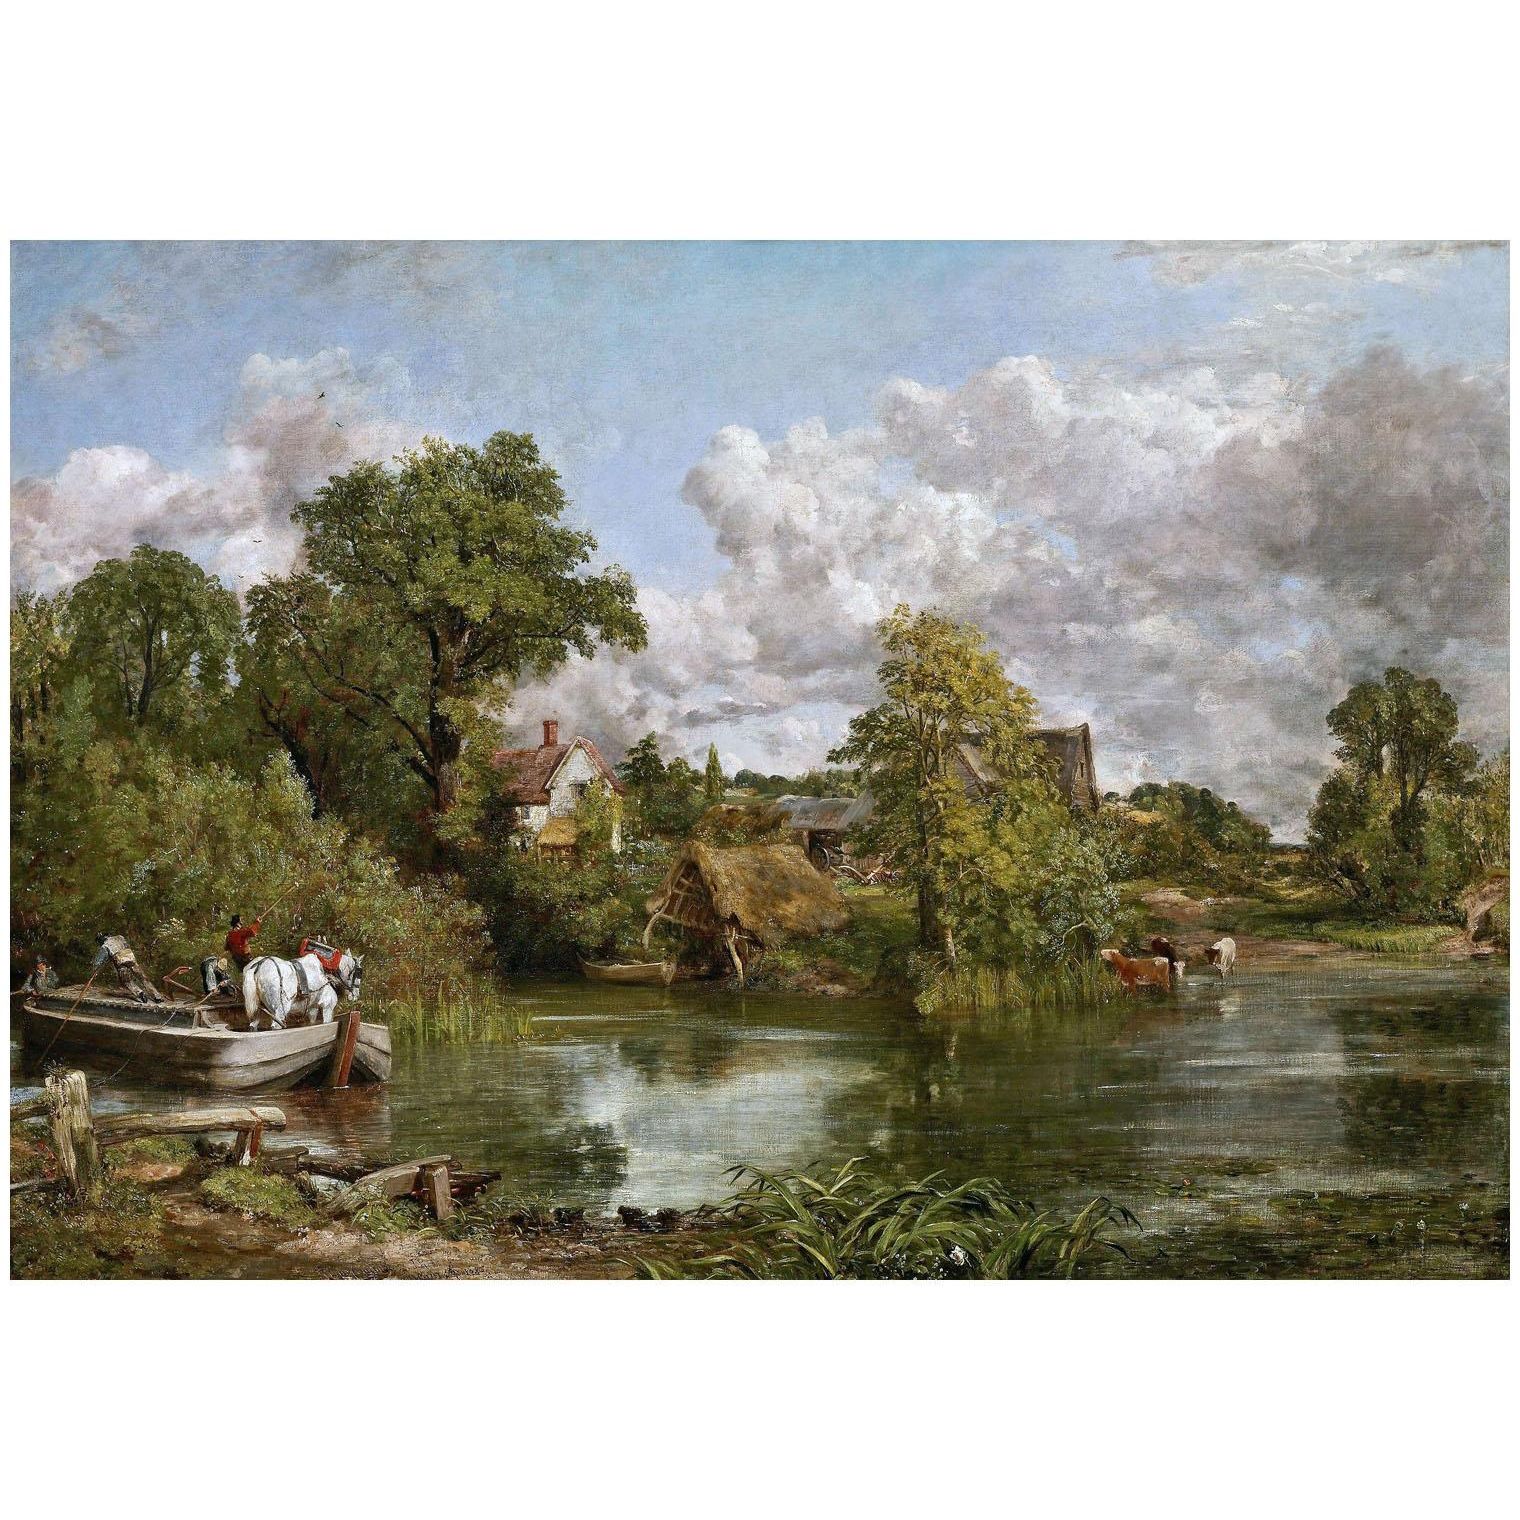 John Constable. The White Horse. 1819. Frick Collection NY